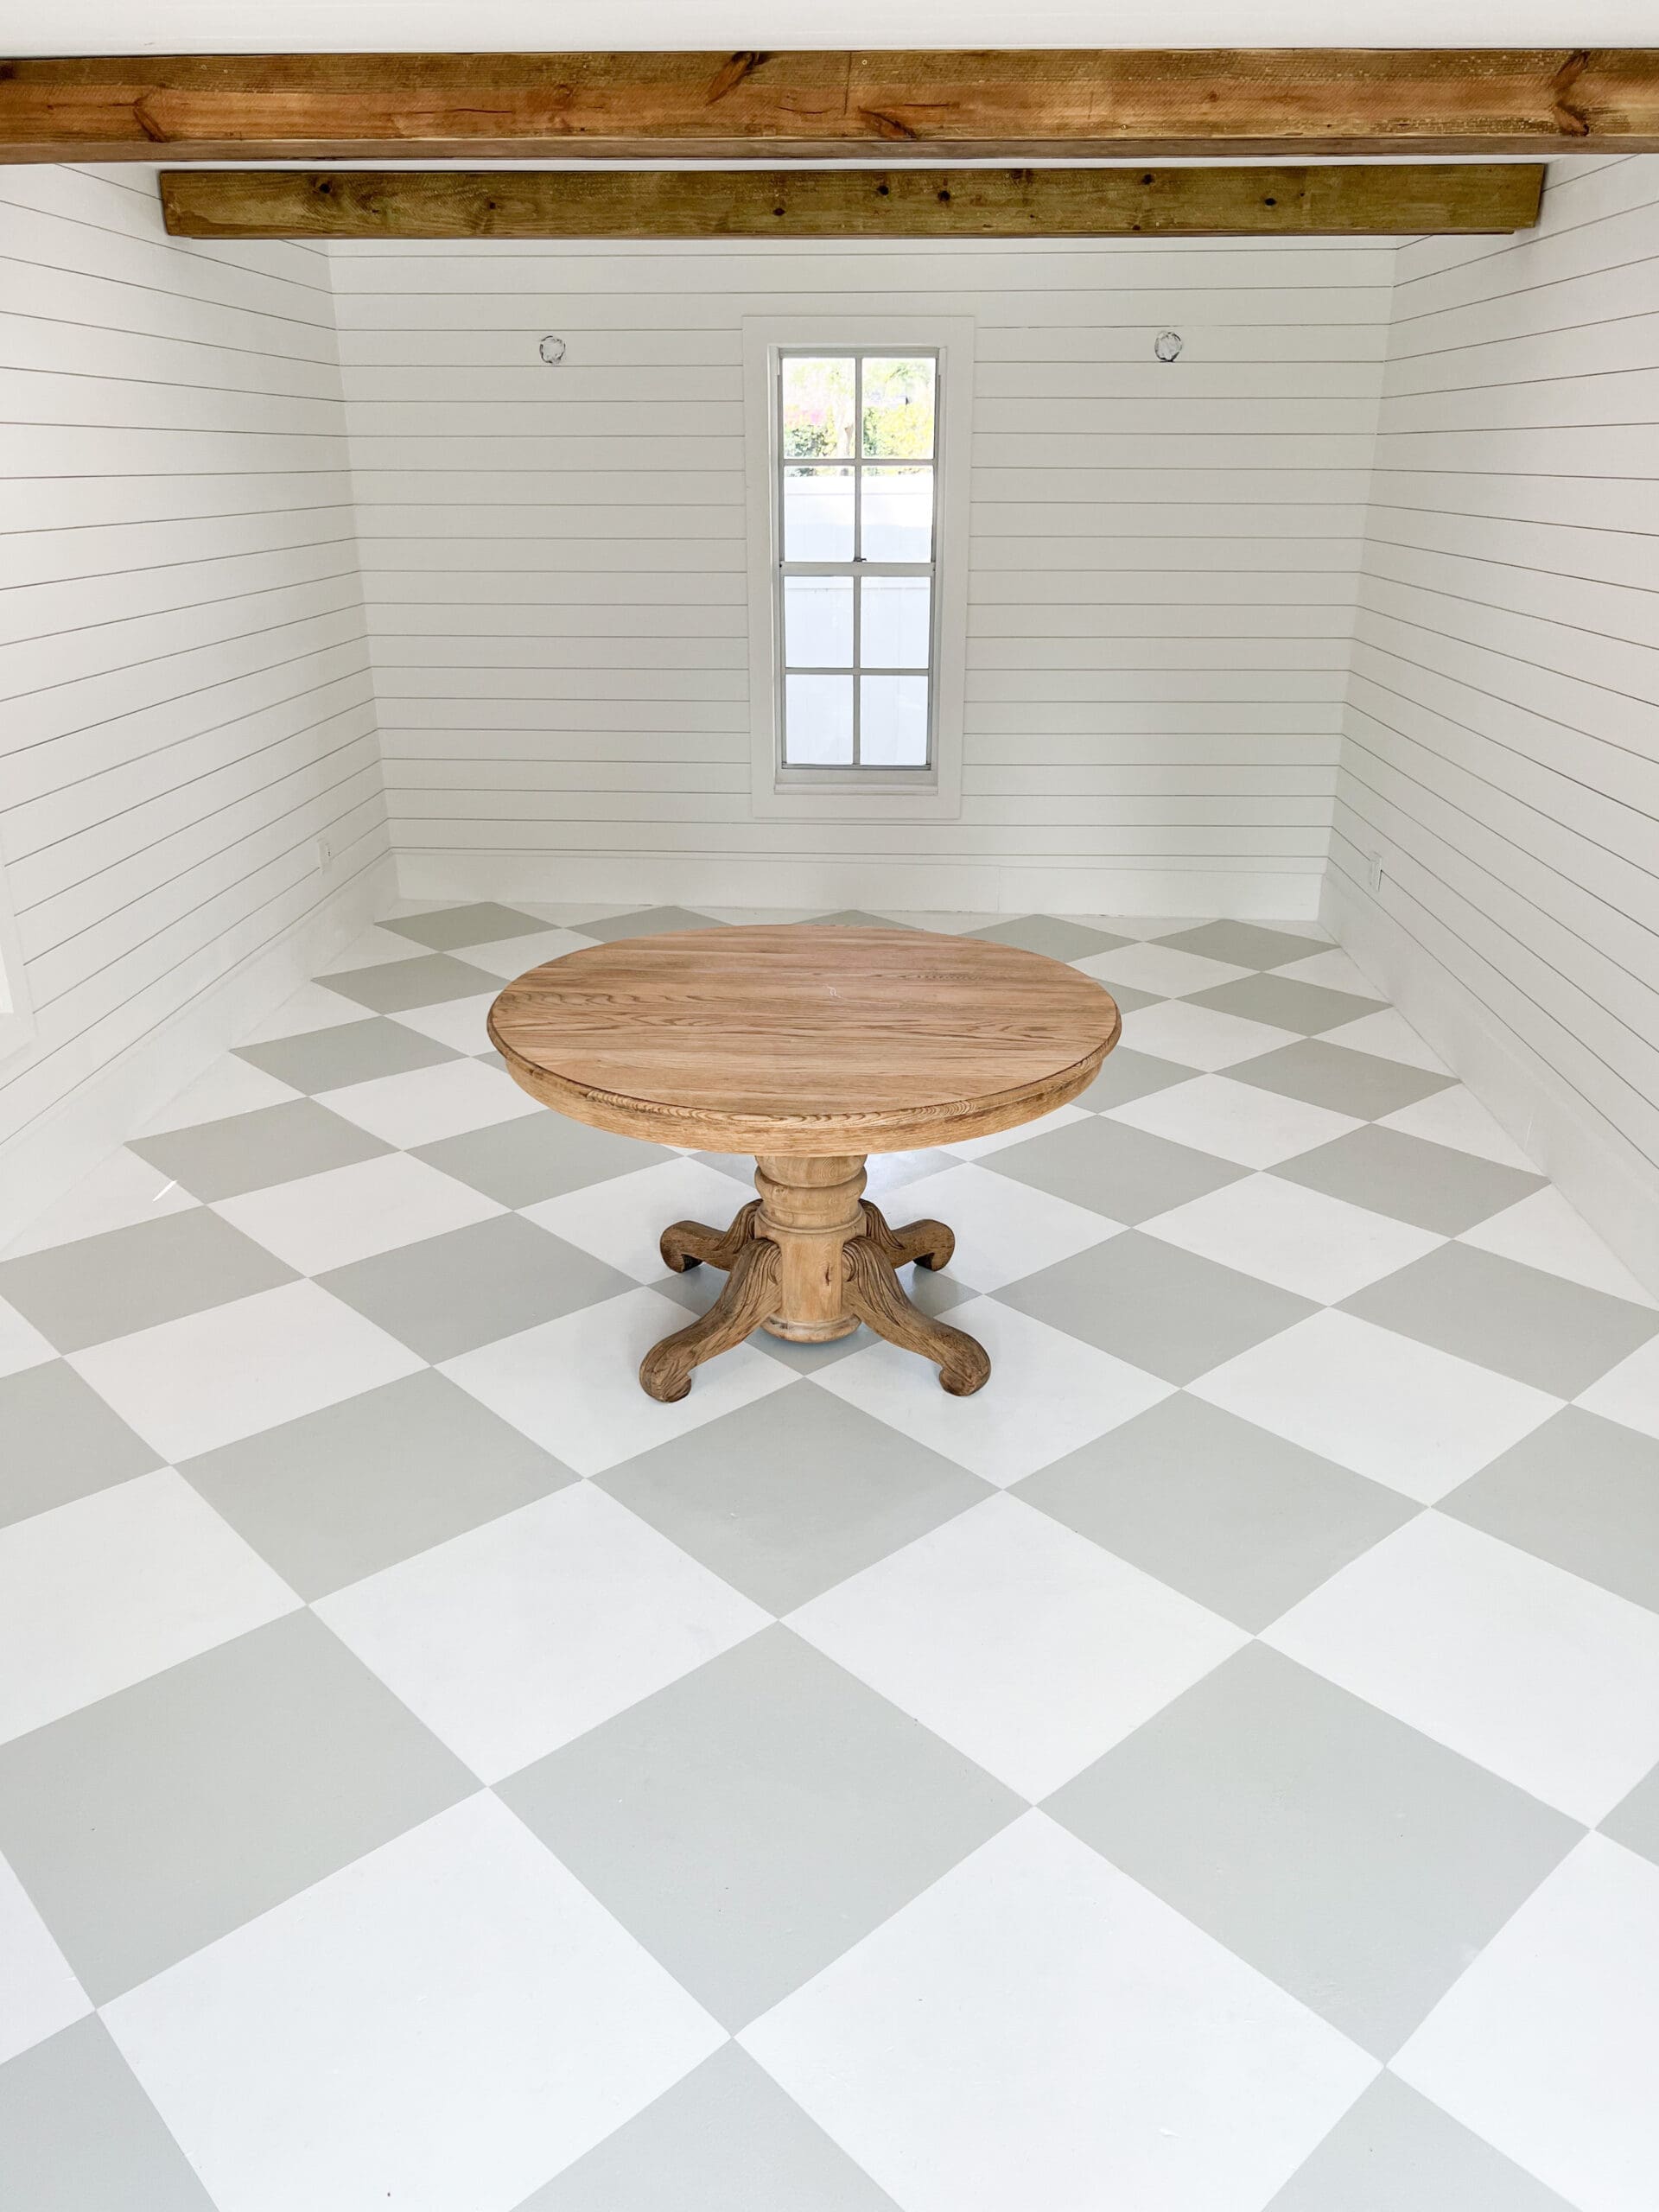 Get Inspired: Checkerboard Floors in Different Ways